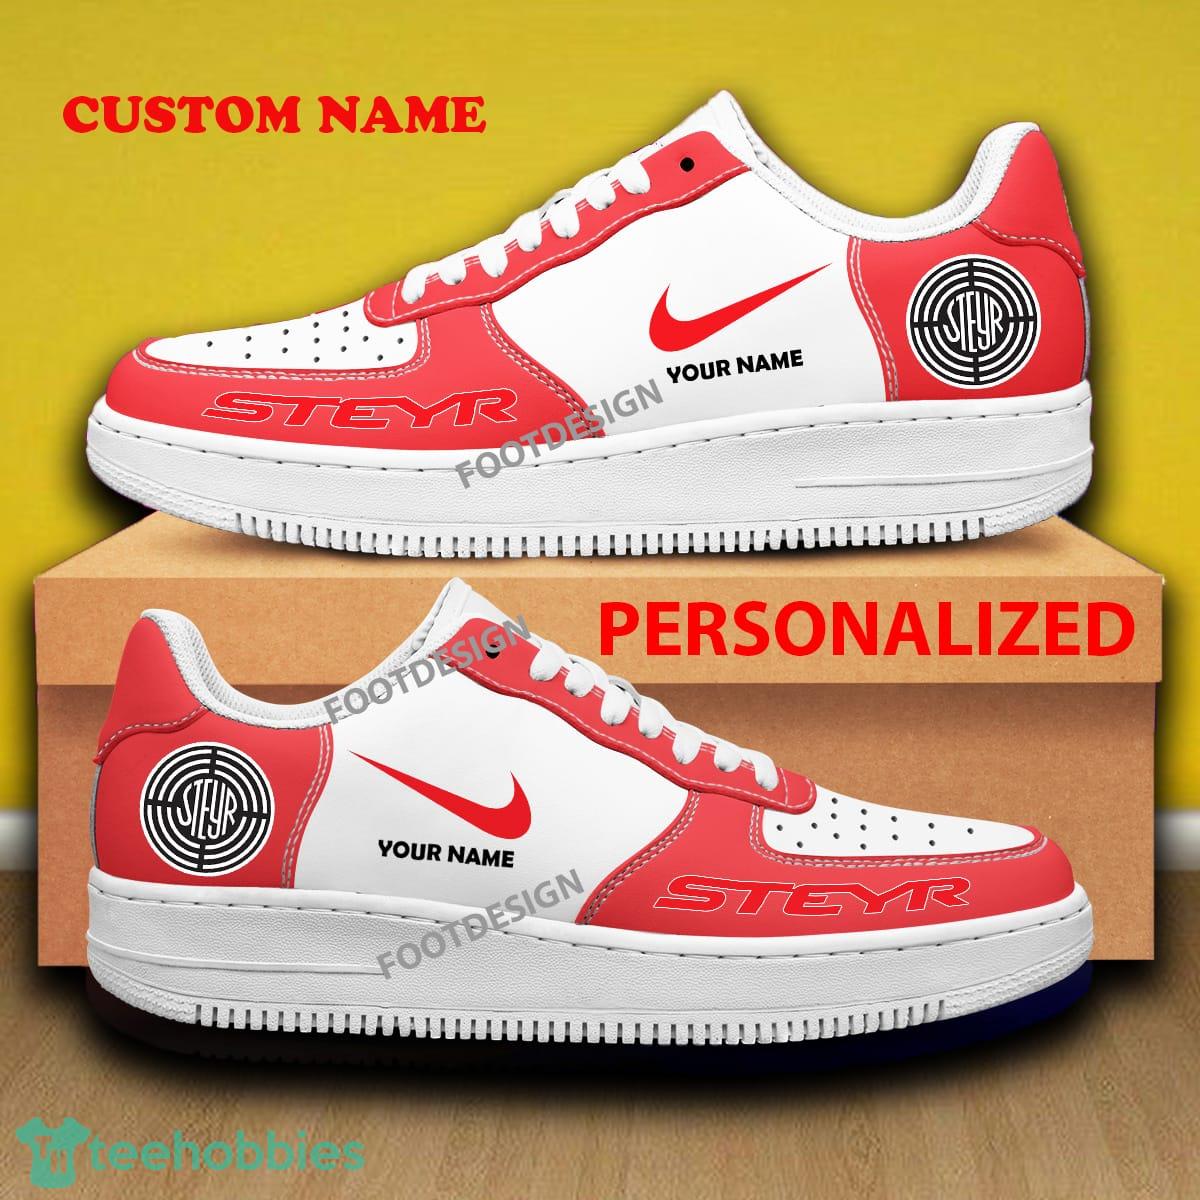 Custom Name Steyr Tractor Air Force 1 Shoes All Over Print Gift - Custom Name Steyr Tractor Air Force 1 Shoes All Over Print Gift